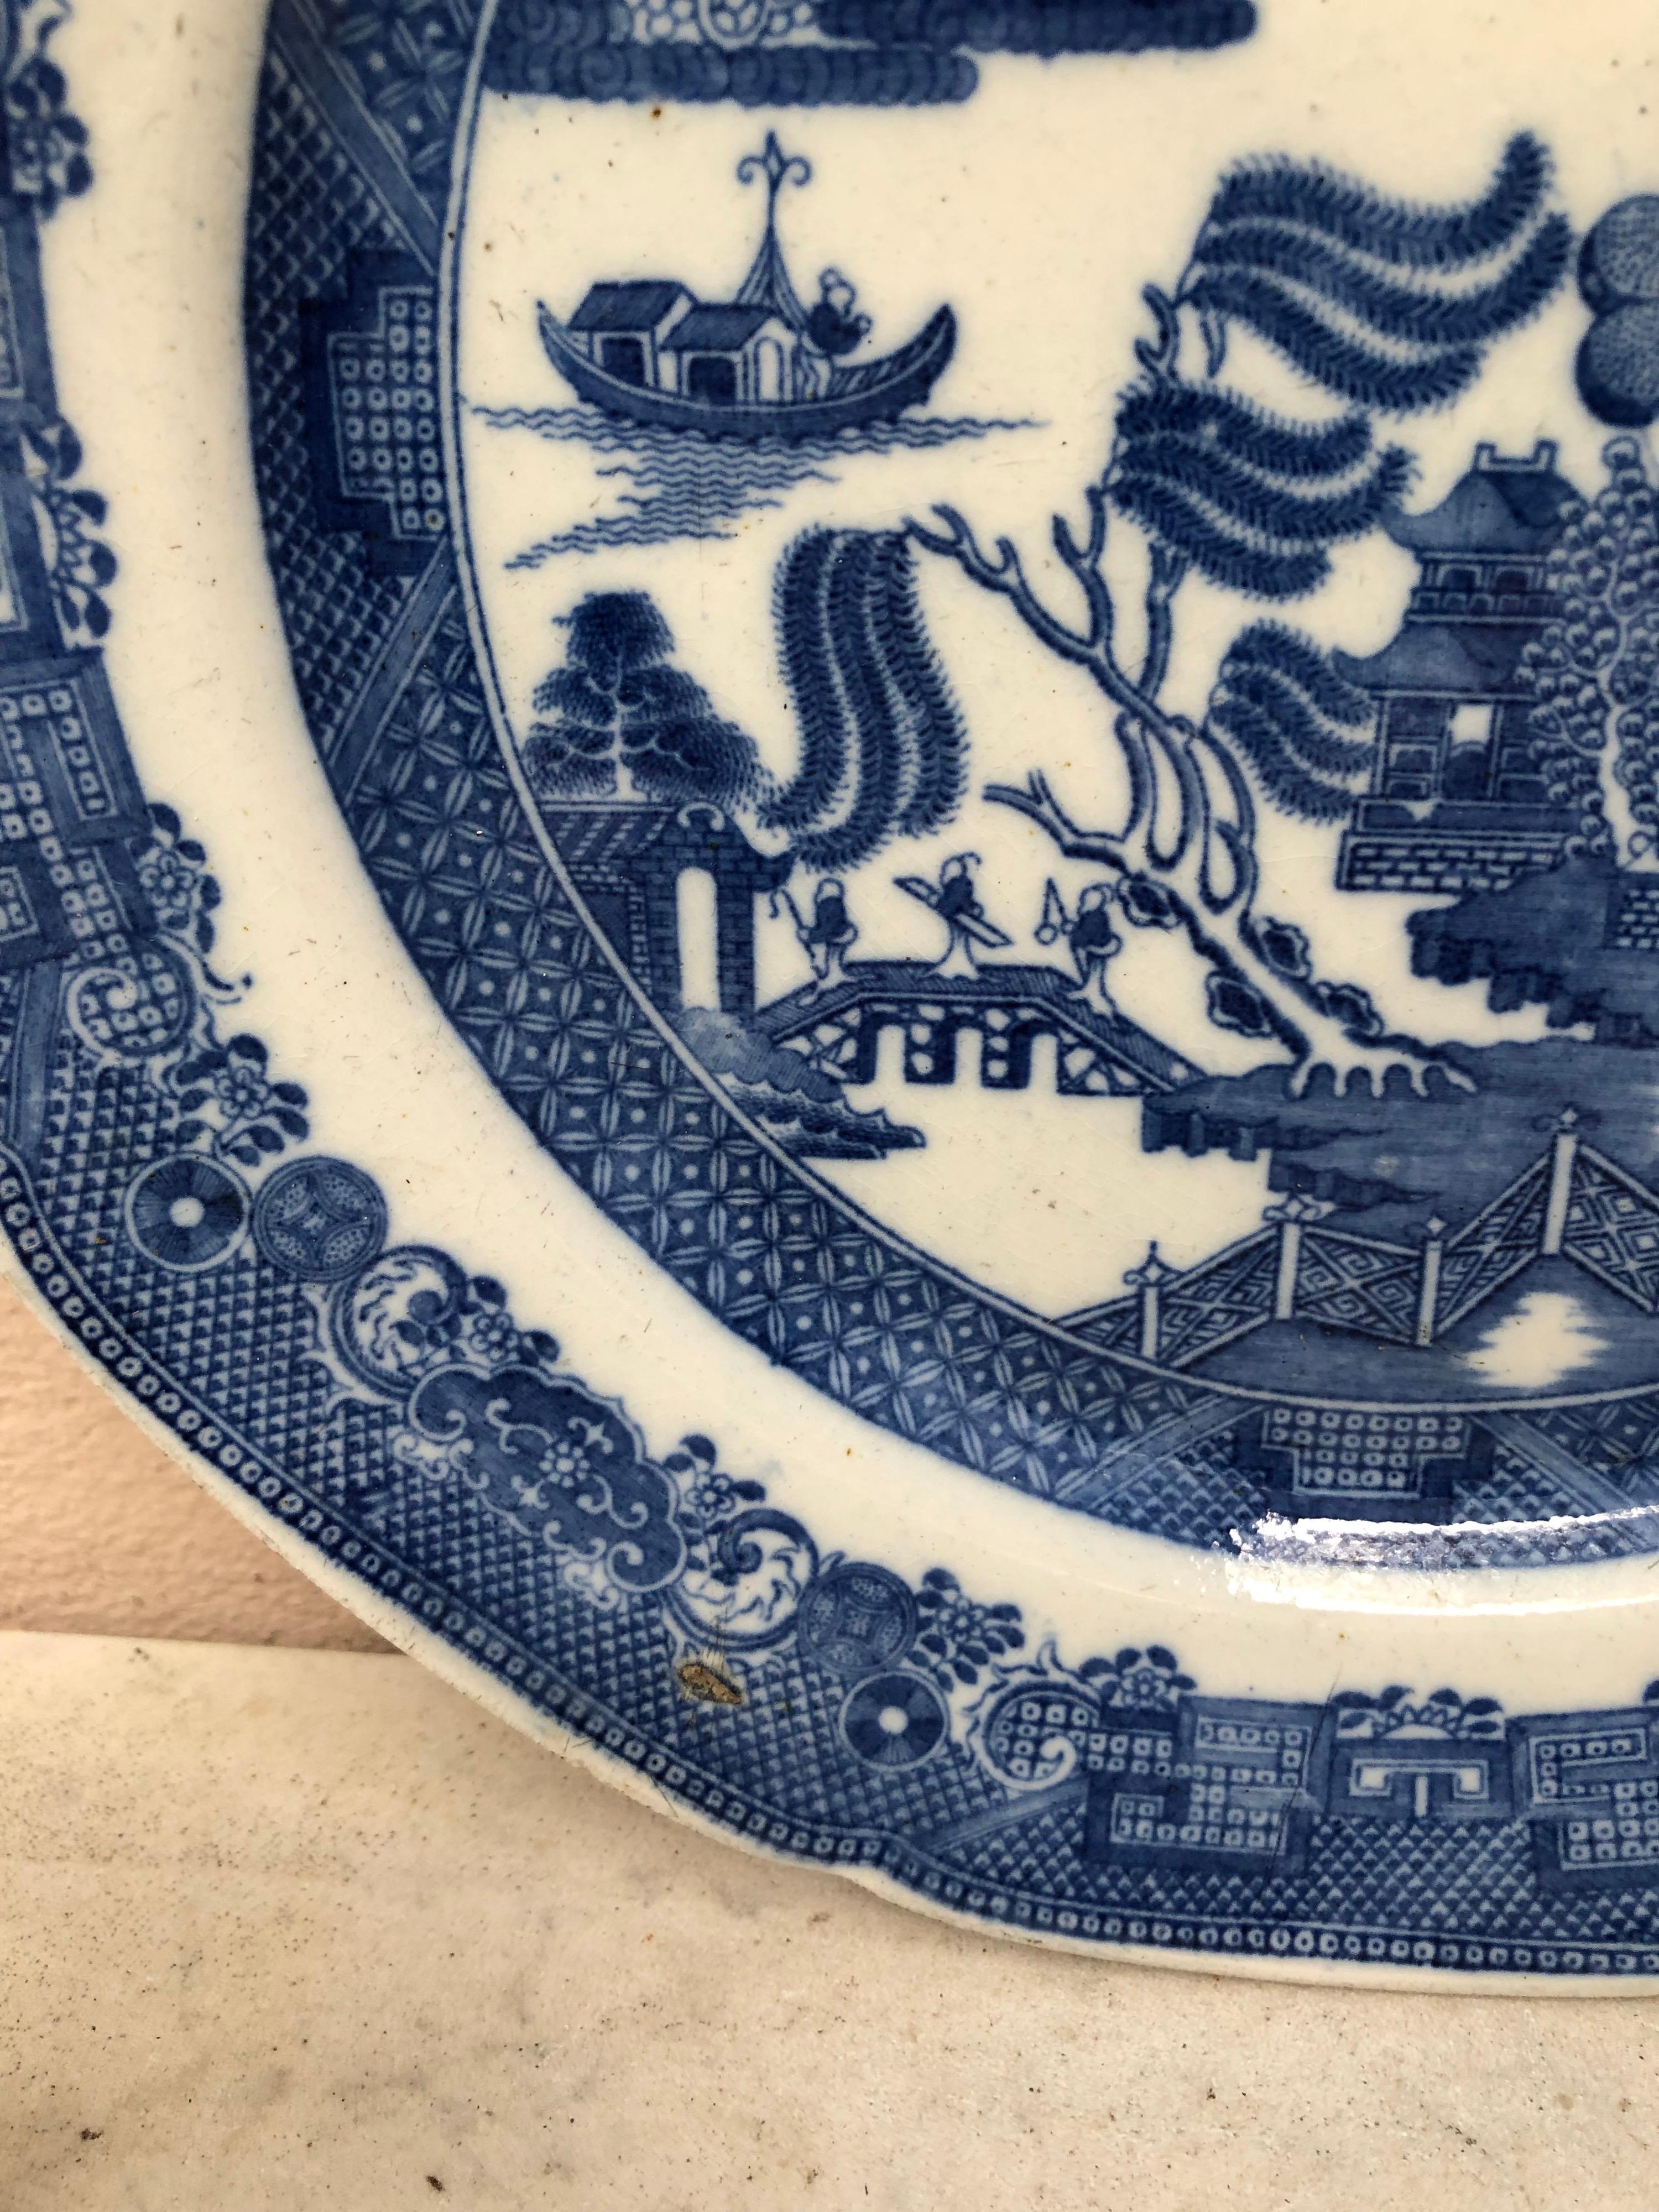 19th century English Chinoiserie blue & white plate.
Measure: 9.5 inches diameter.